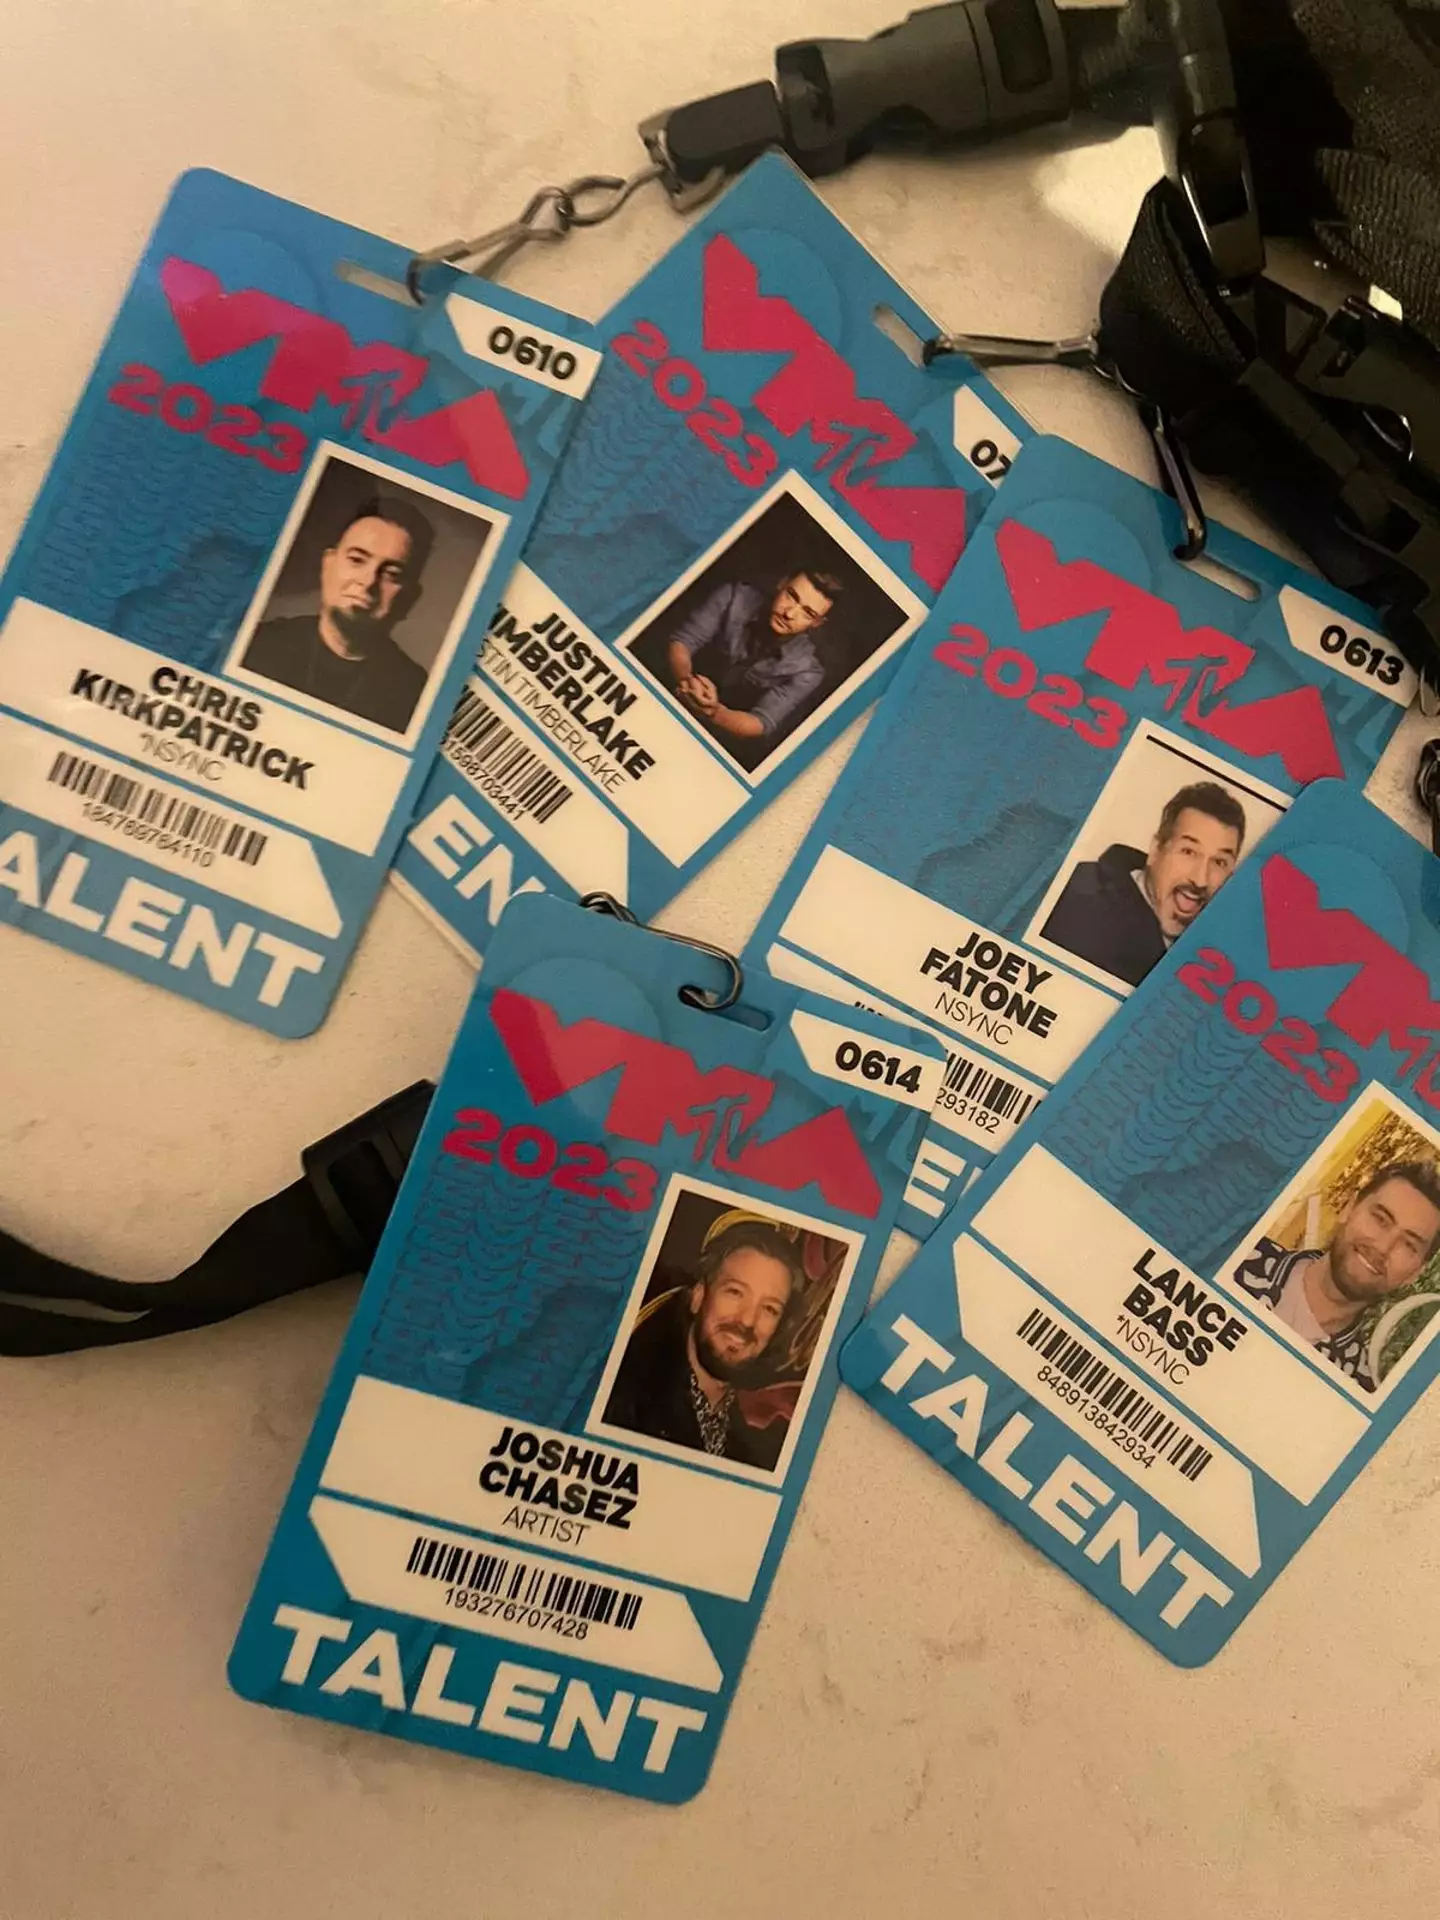 JC Chasez posted a photo of their backstage passes.